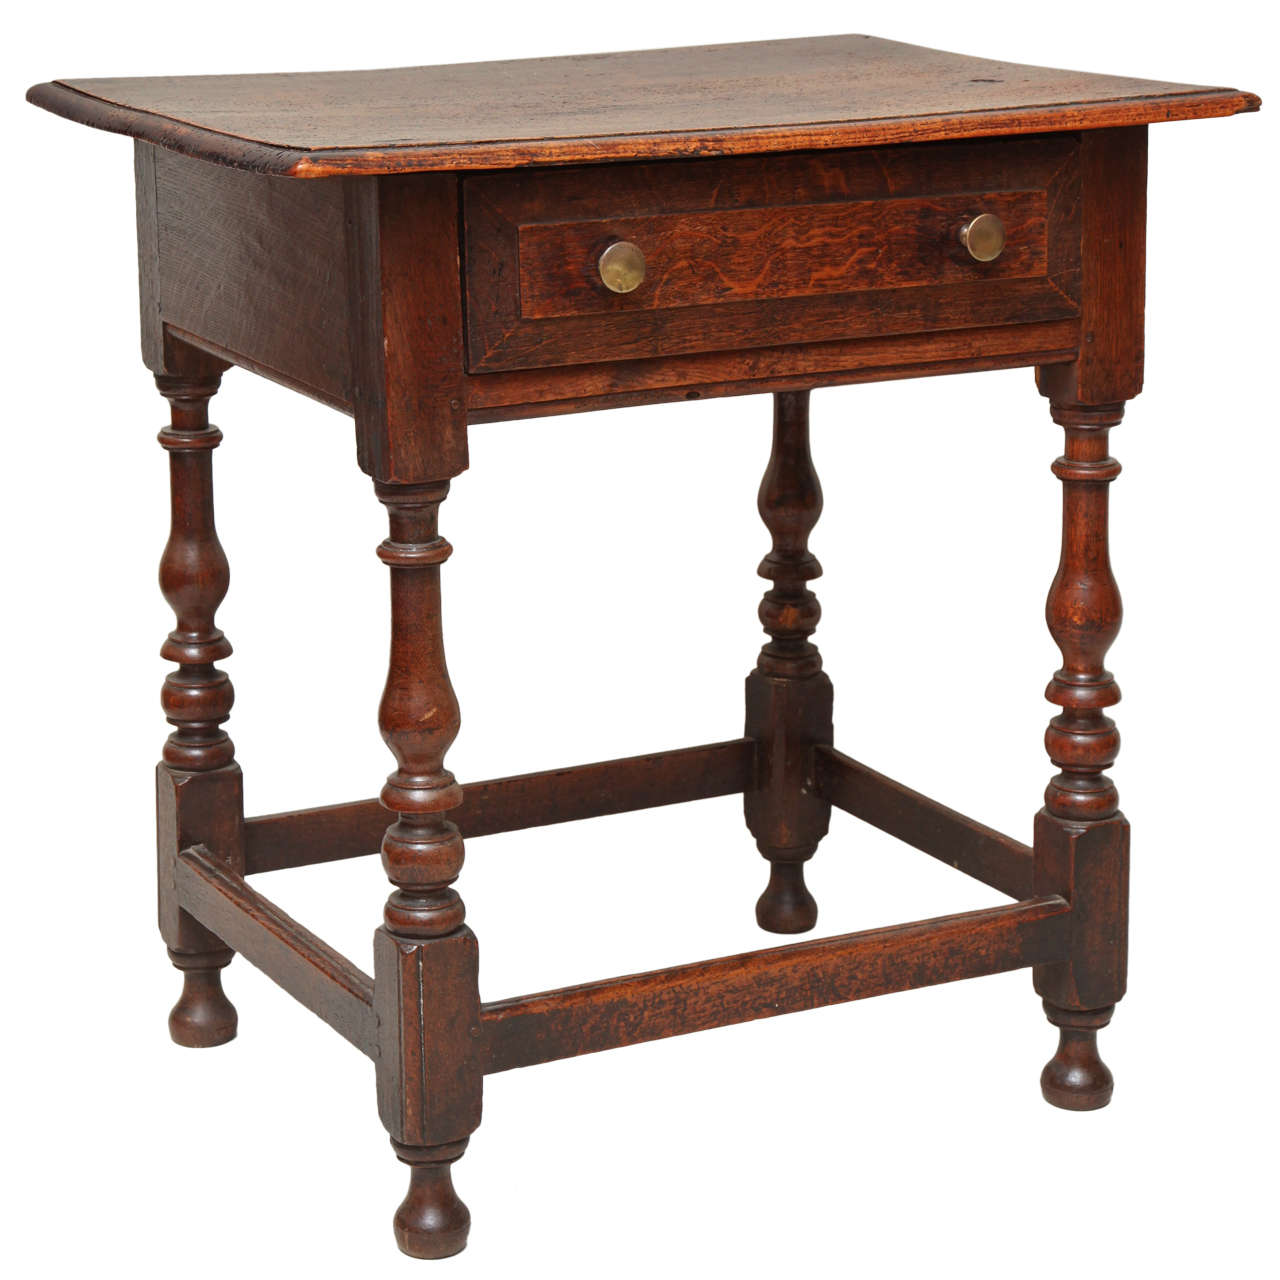 Late 17th Century English Oak and Ash Side Table